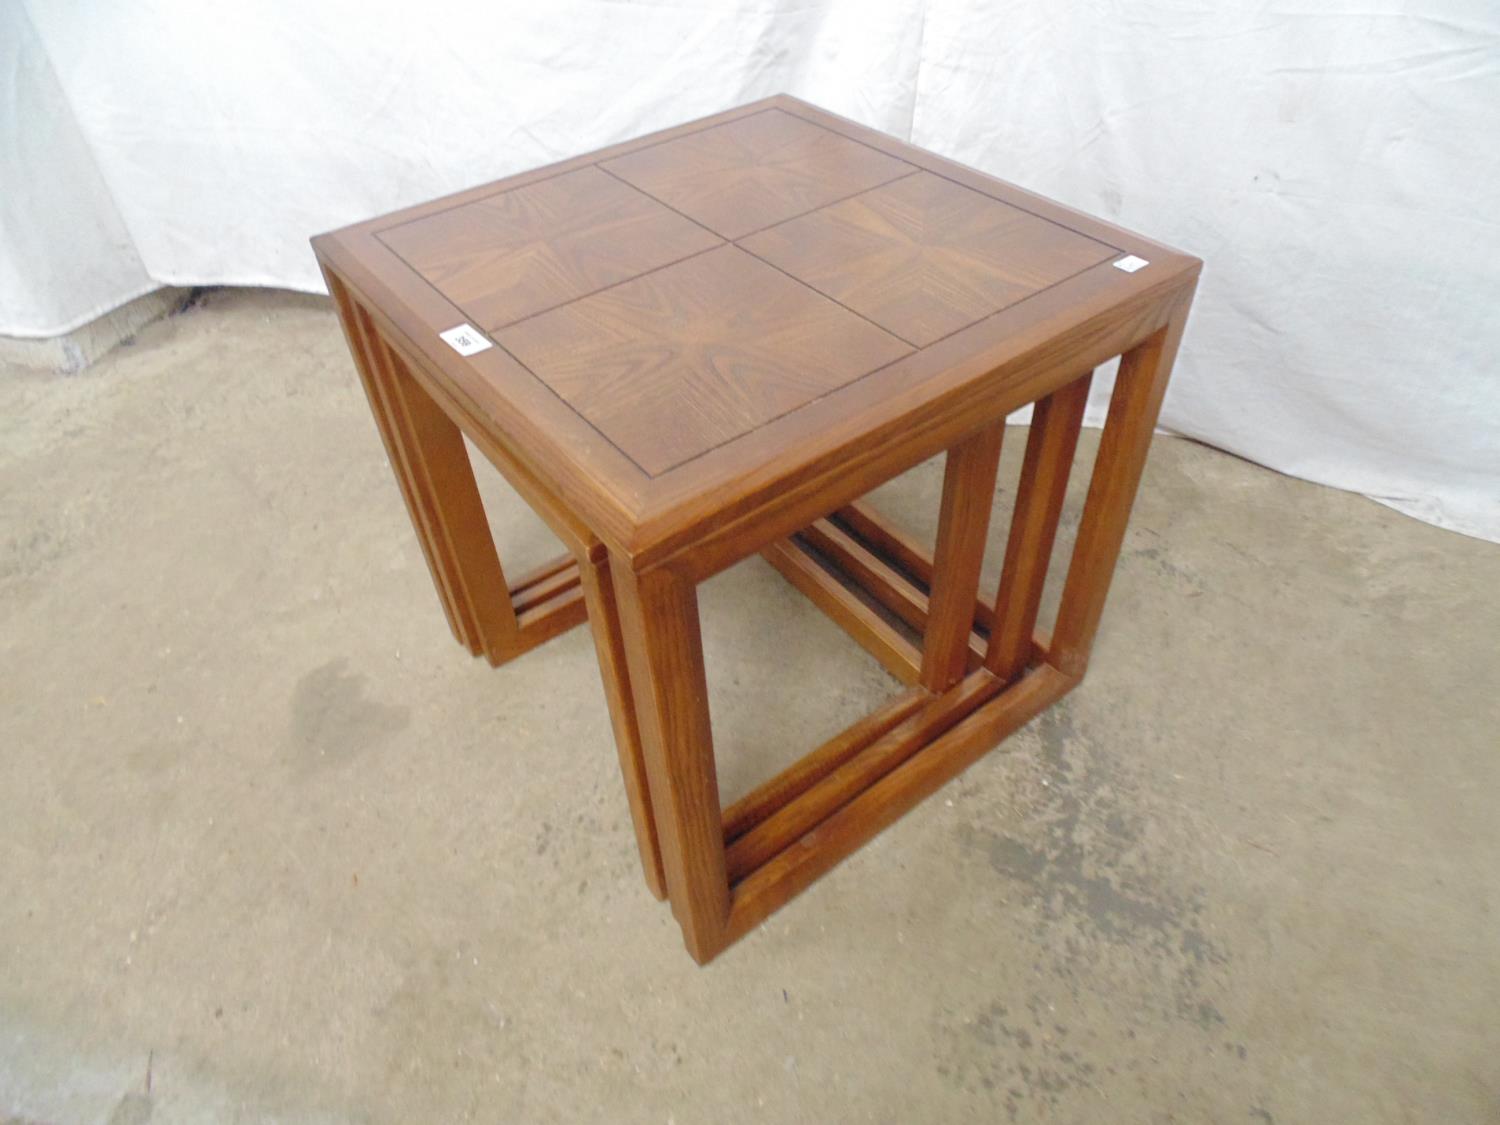 Nest of G-Plan tables having quartered parquetry style top - largest 51cm x 51cm x 50cm tall - Image 2 of 3